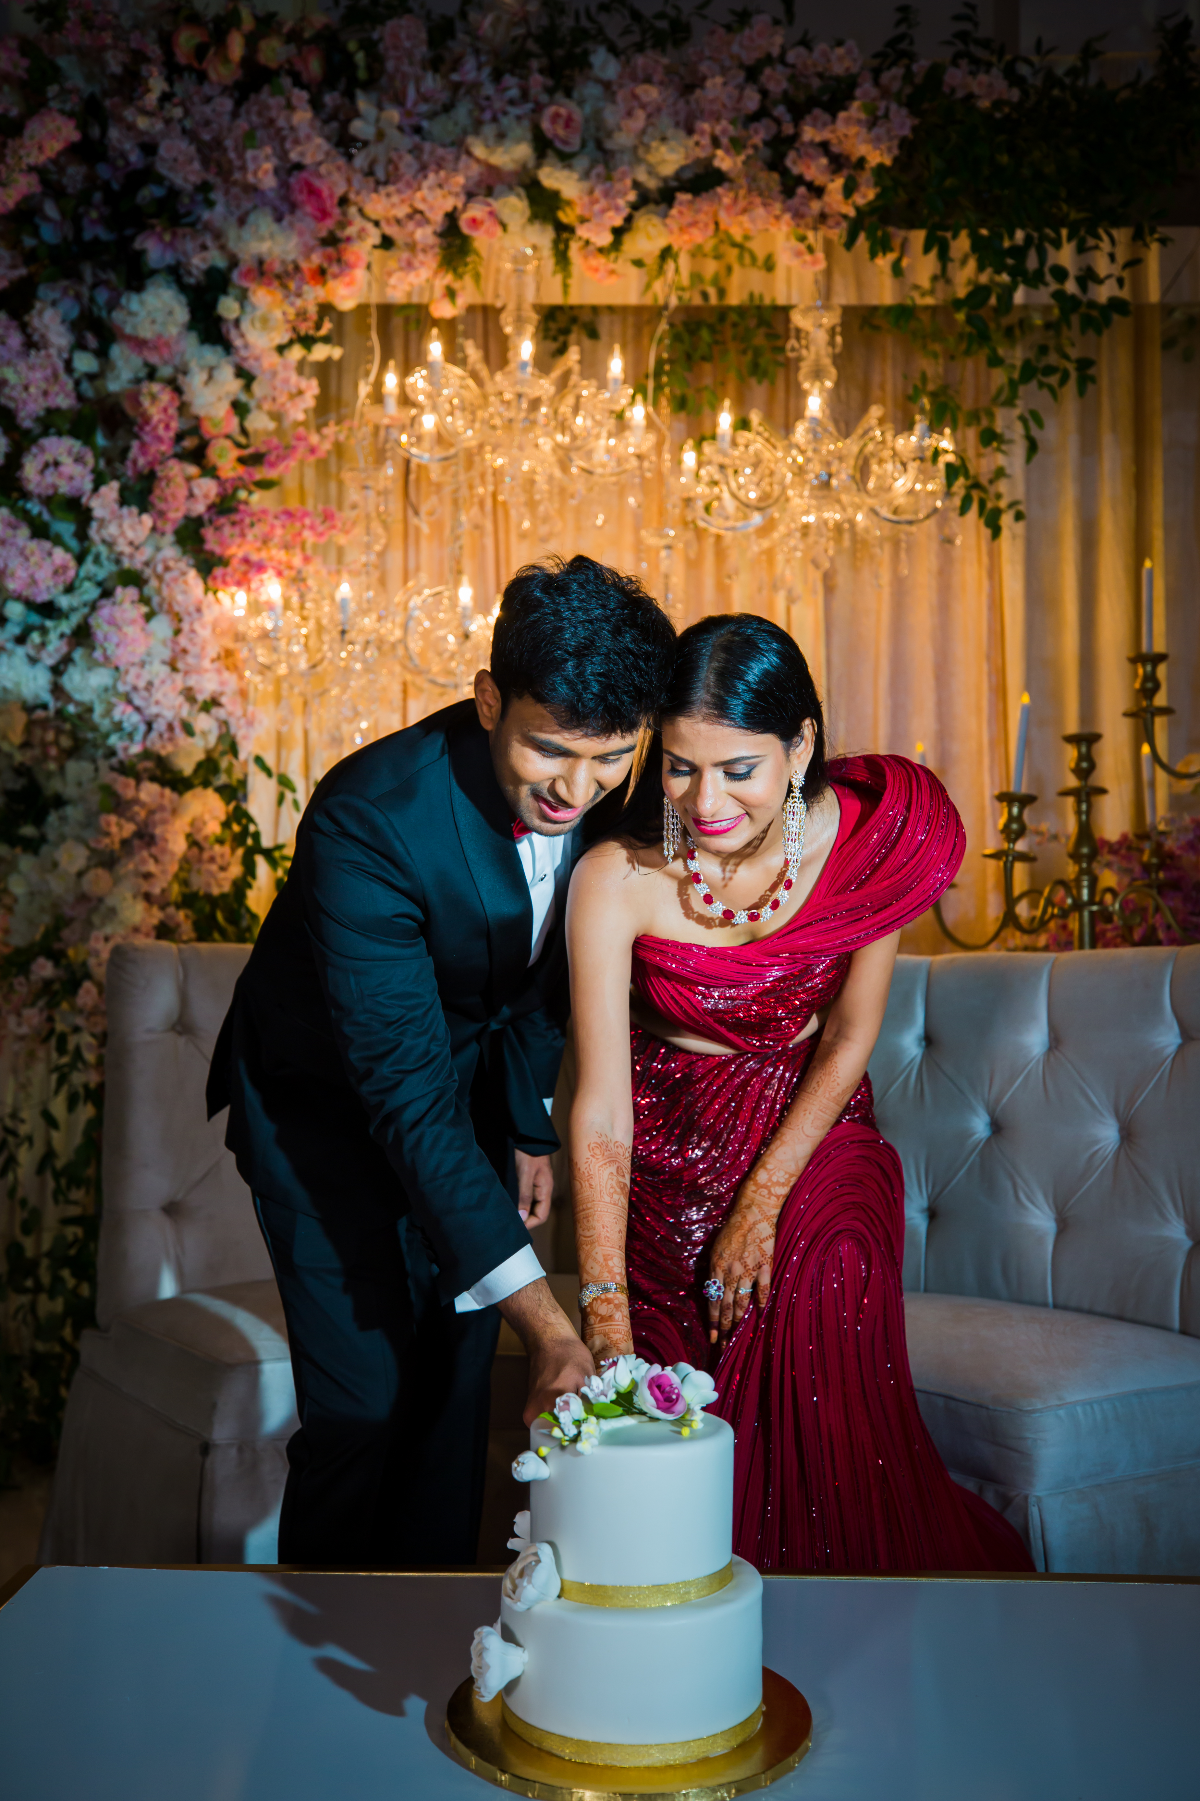 This couple's love was captured as a sharing and understanding relationship - Reception of Aneesha